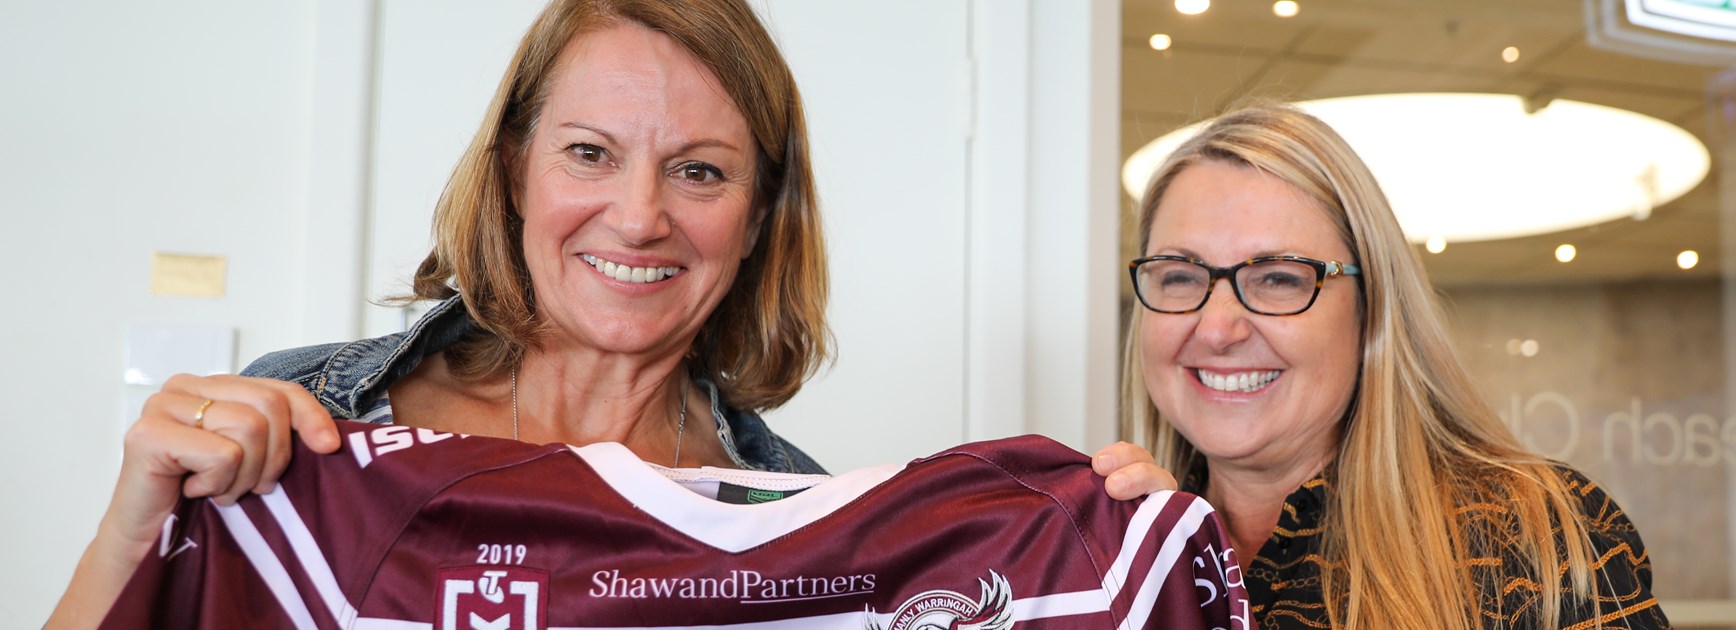 Sea Eagles proud to support Sargood Foundation